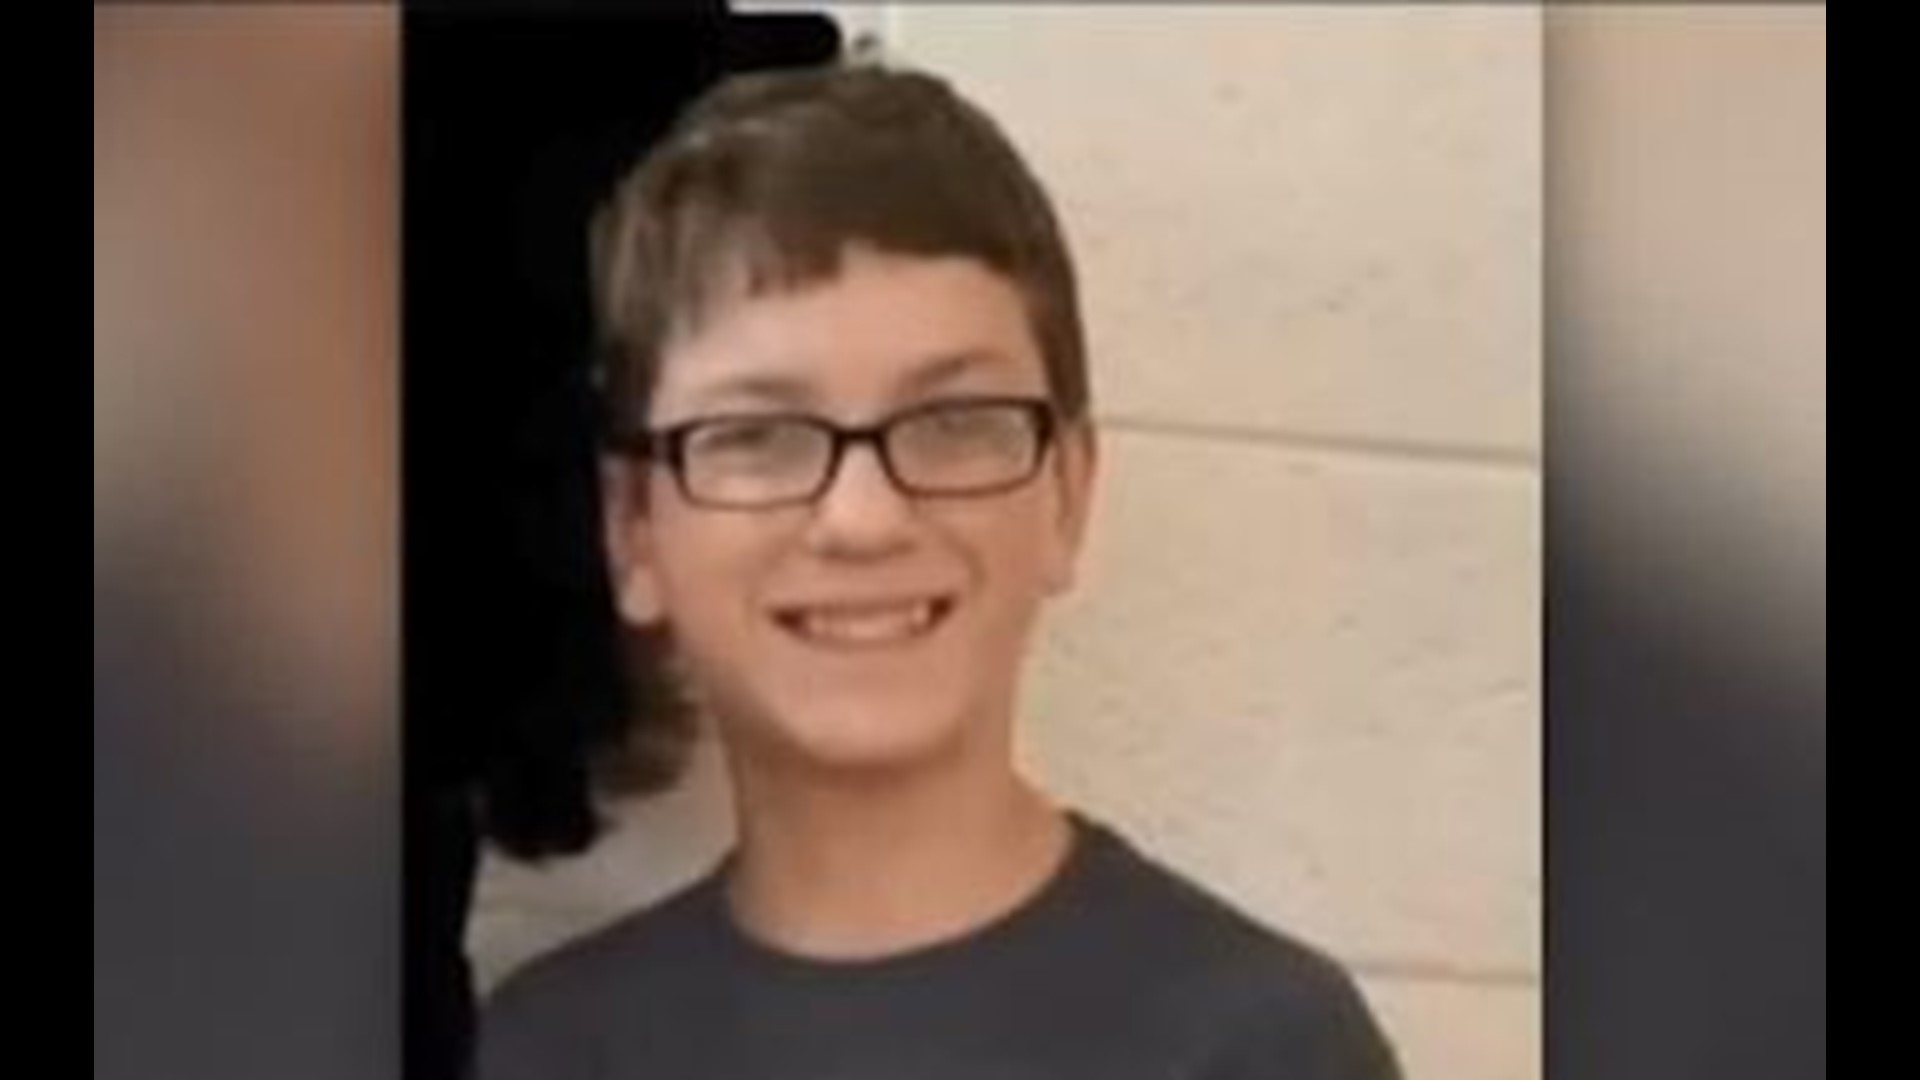 14-year-old boy in Ohio disappeared on his way to school 10 days ago ...